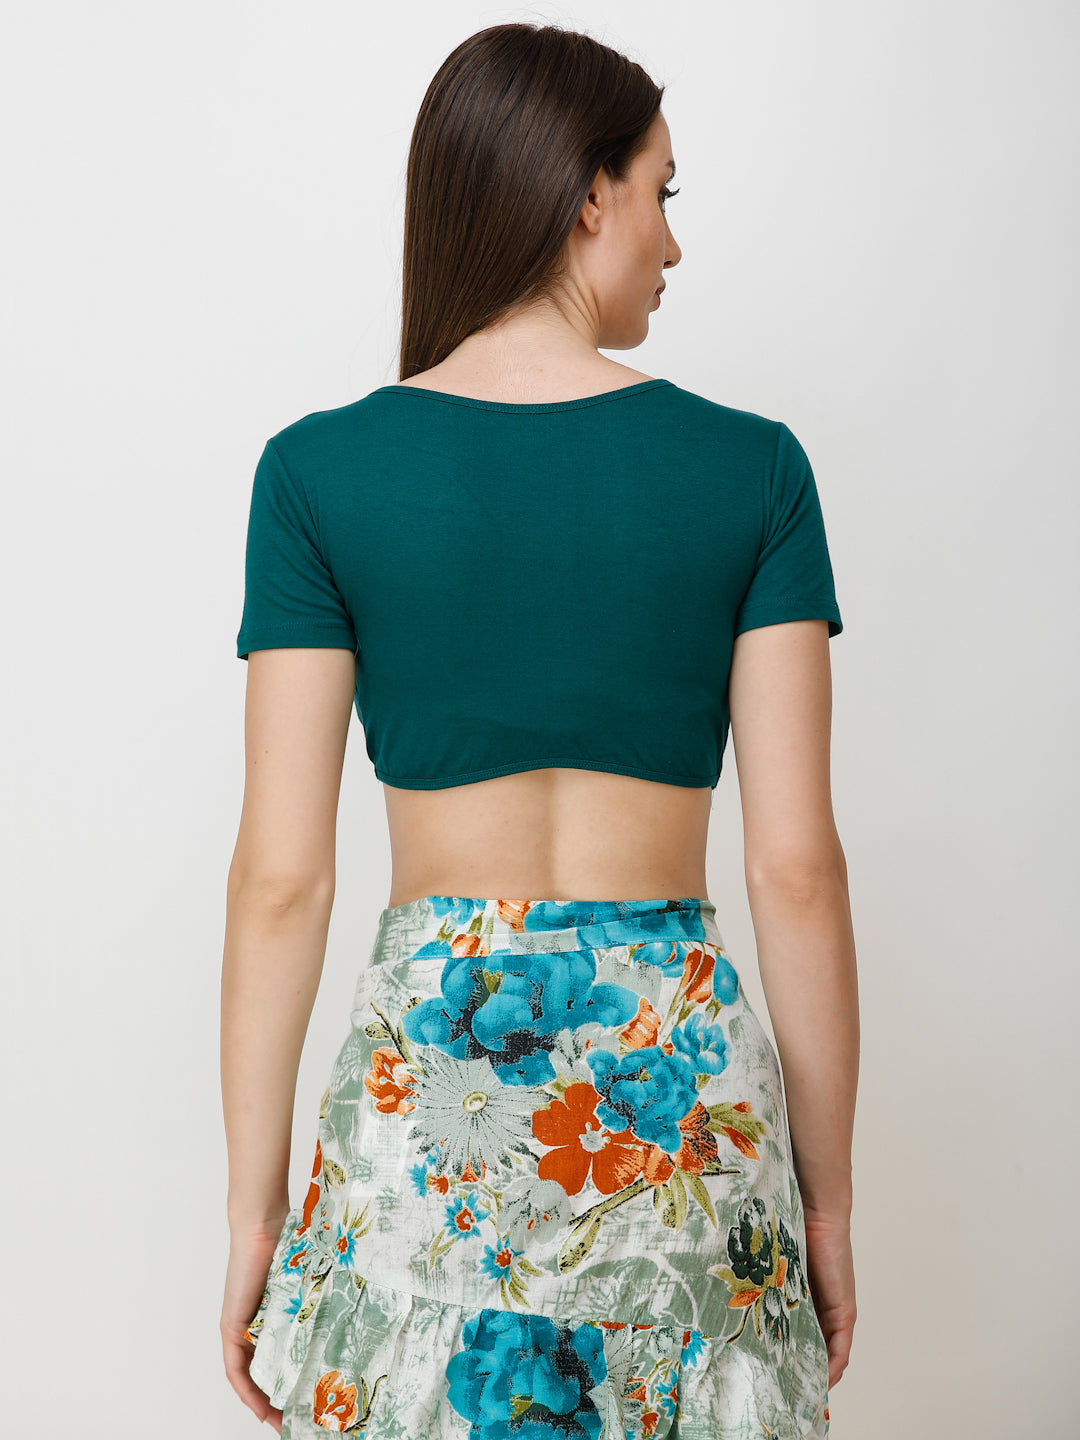 SCORPIUS Women Teal Green Solid Front Knot Crop Top